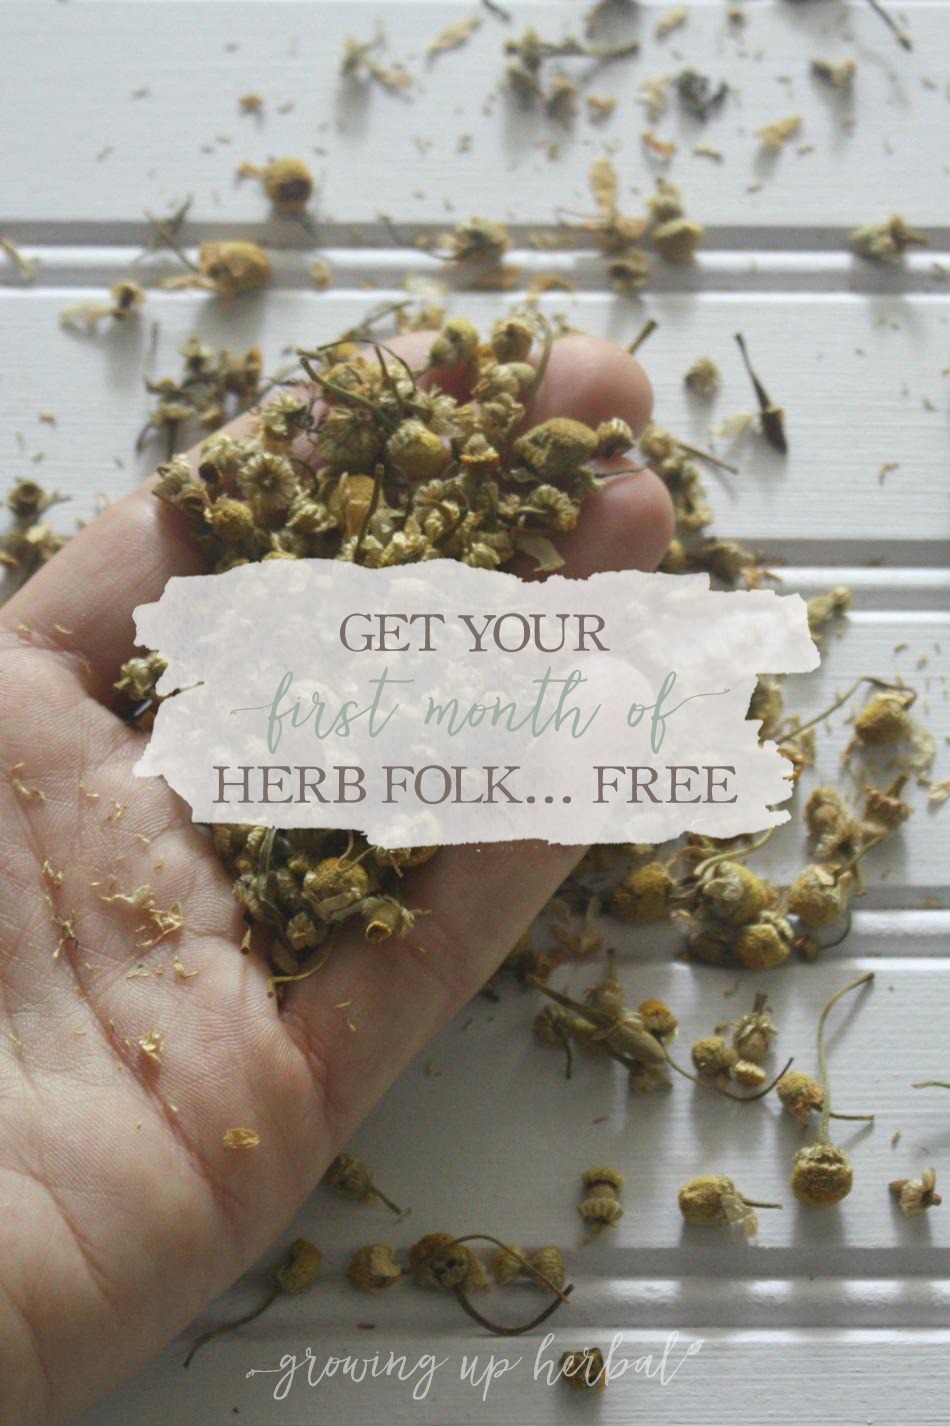 Get Your First Month of Herb Folk For FREE! | Growing Up Herbal | Herb Folk is an exclusive membership site dedicated to helping herbal-minded folks learn about and use herbs through the study and use of one herb a month. Get your first month FREE!